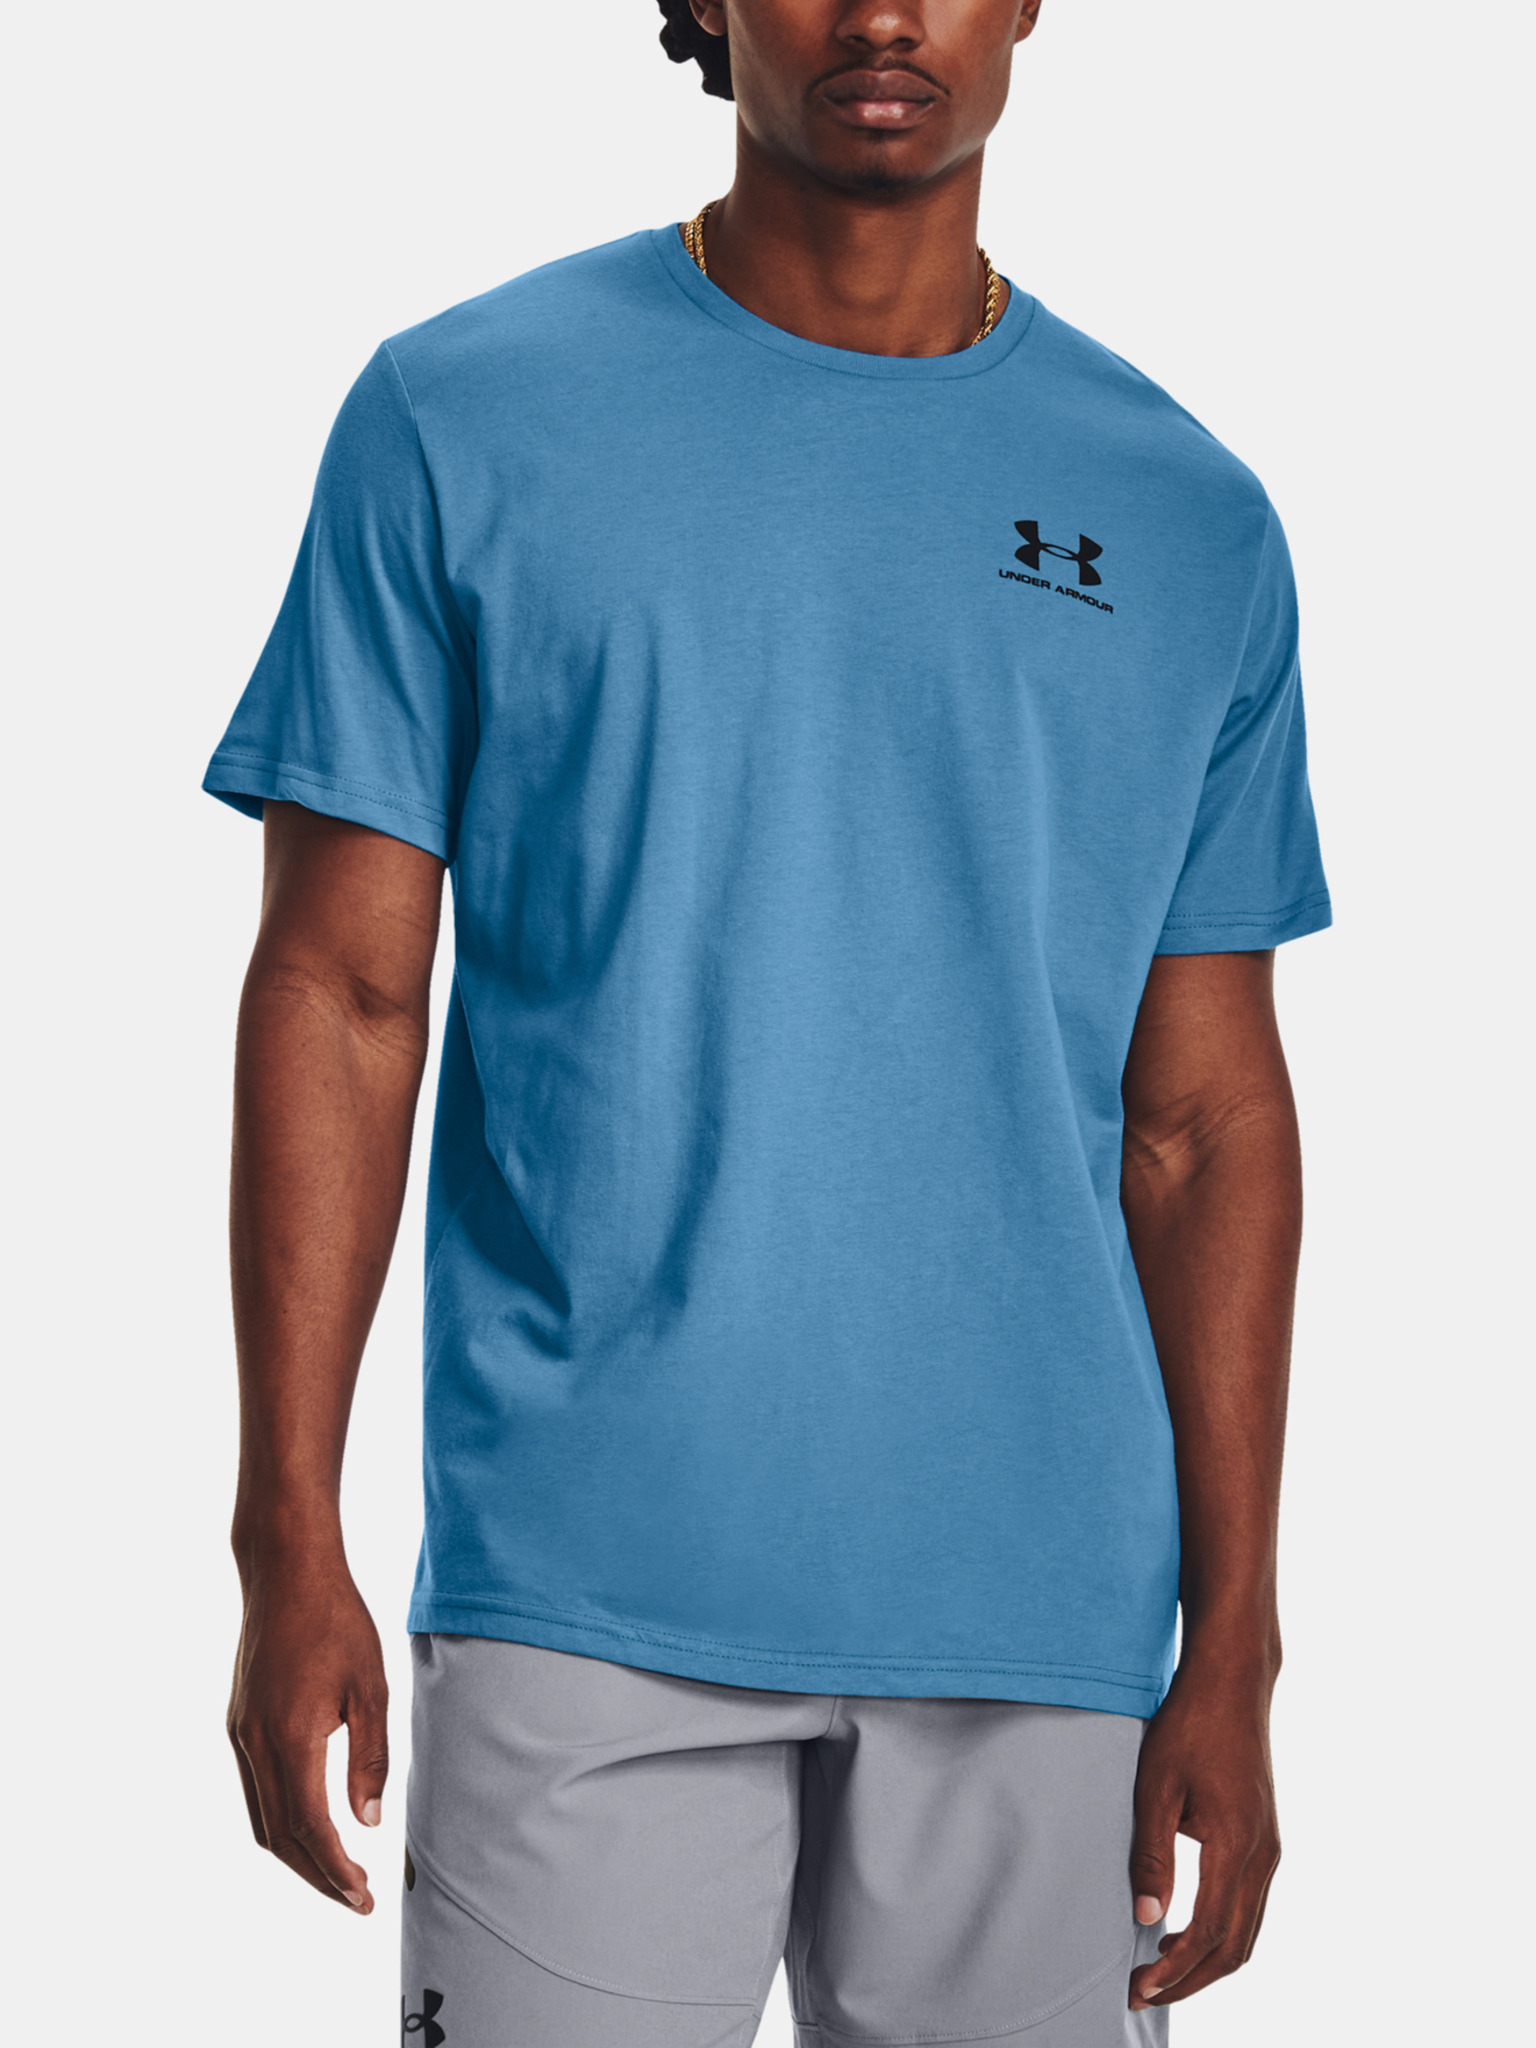 Under Armour sportstyle logo t-shirt in bright blue